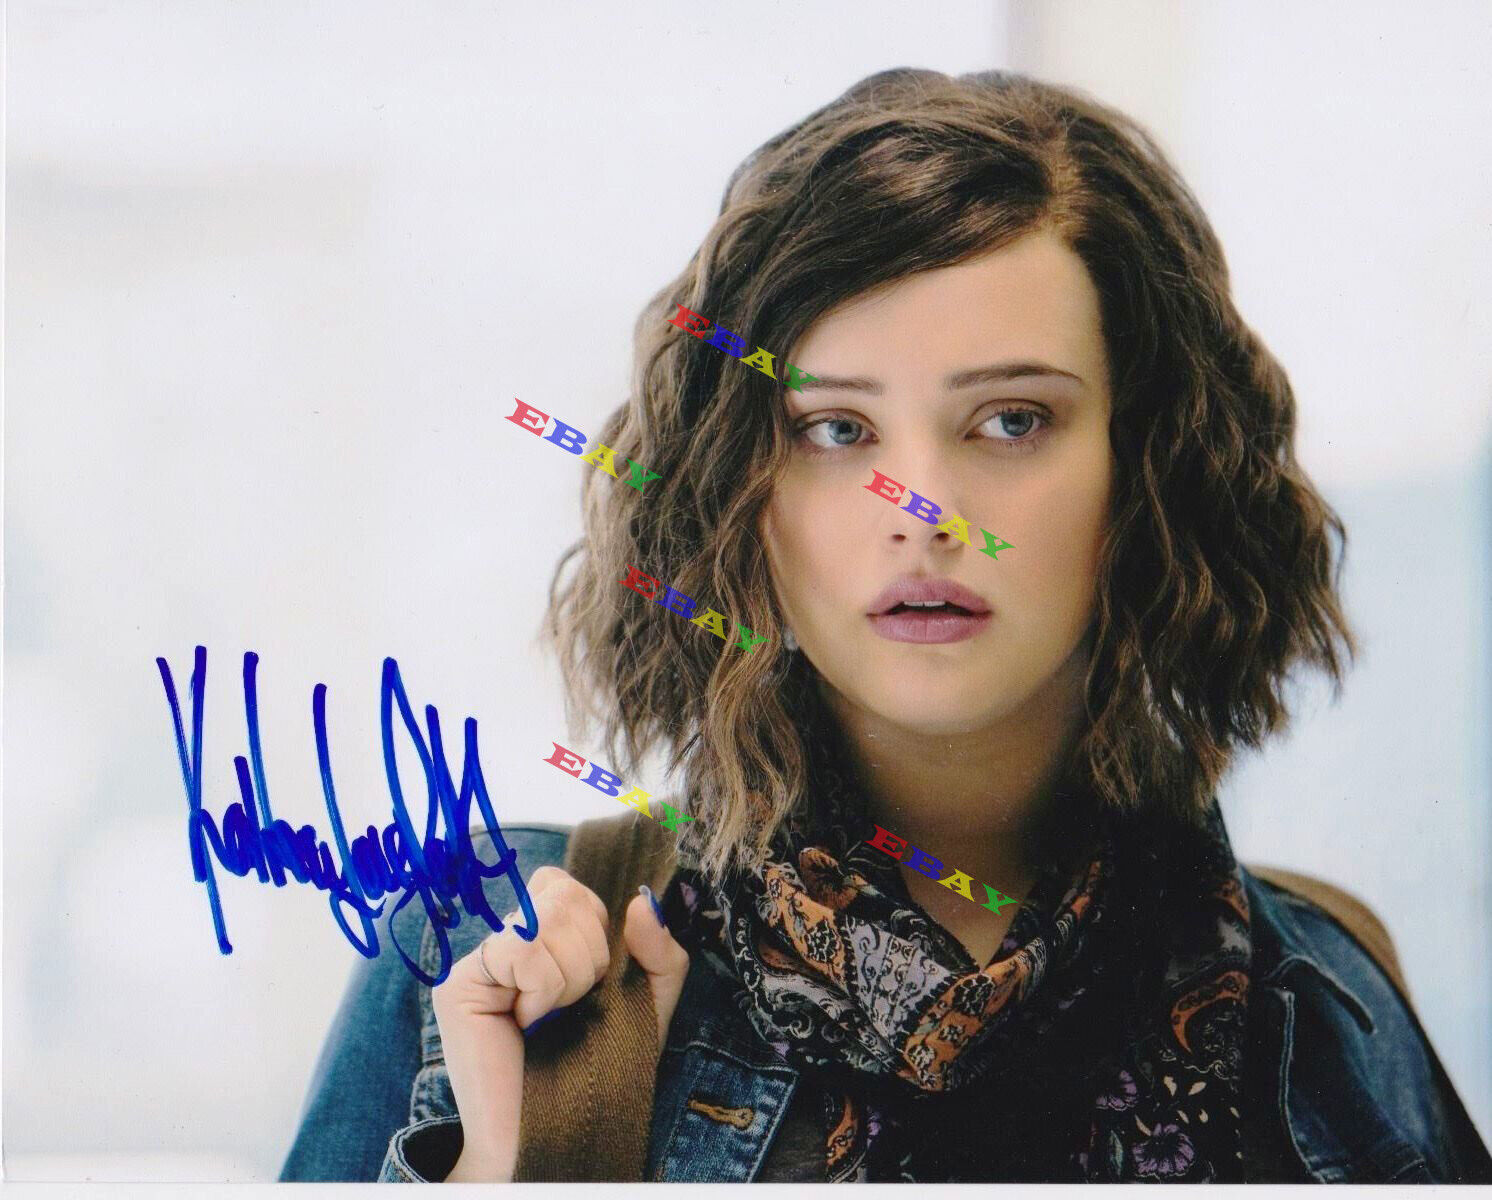 KATHERINE LANGFORD Autographed Signed 8x10 Photo Poster painting REPRINT